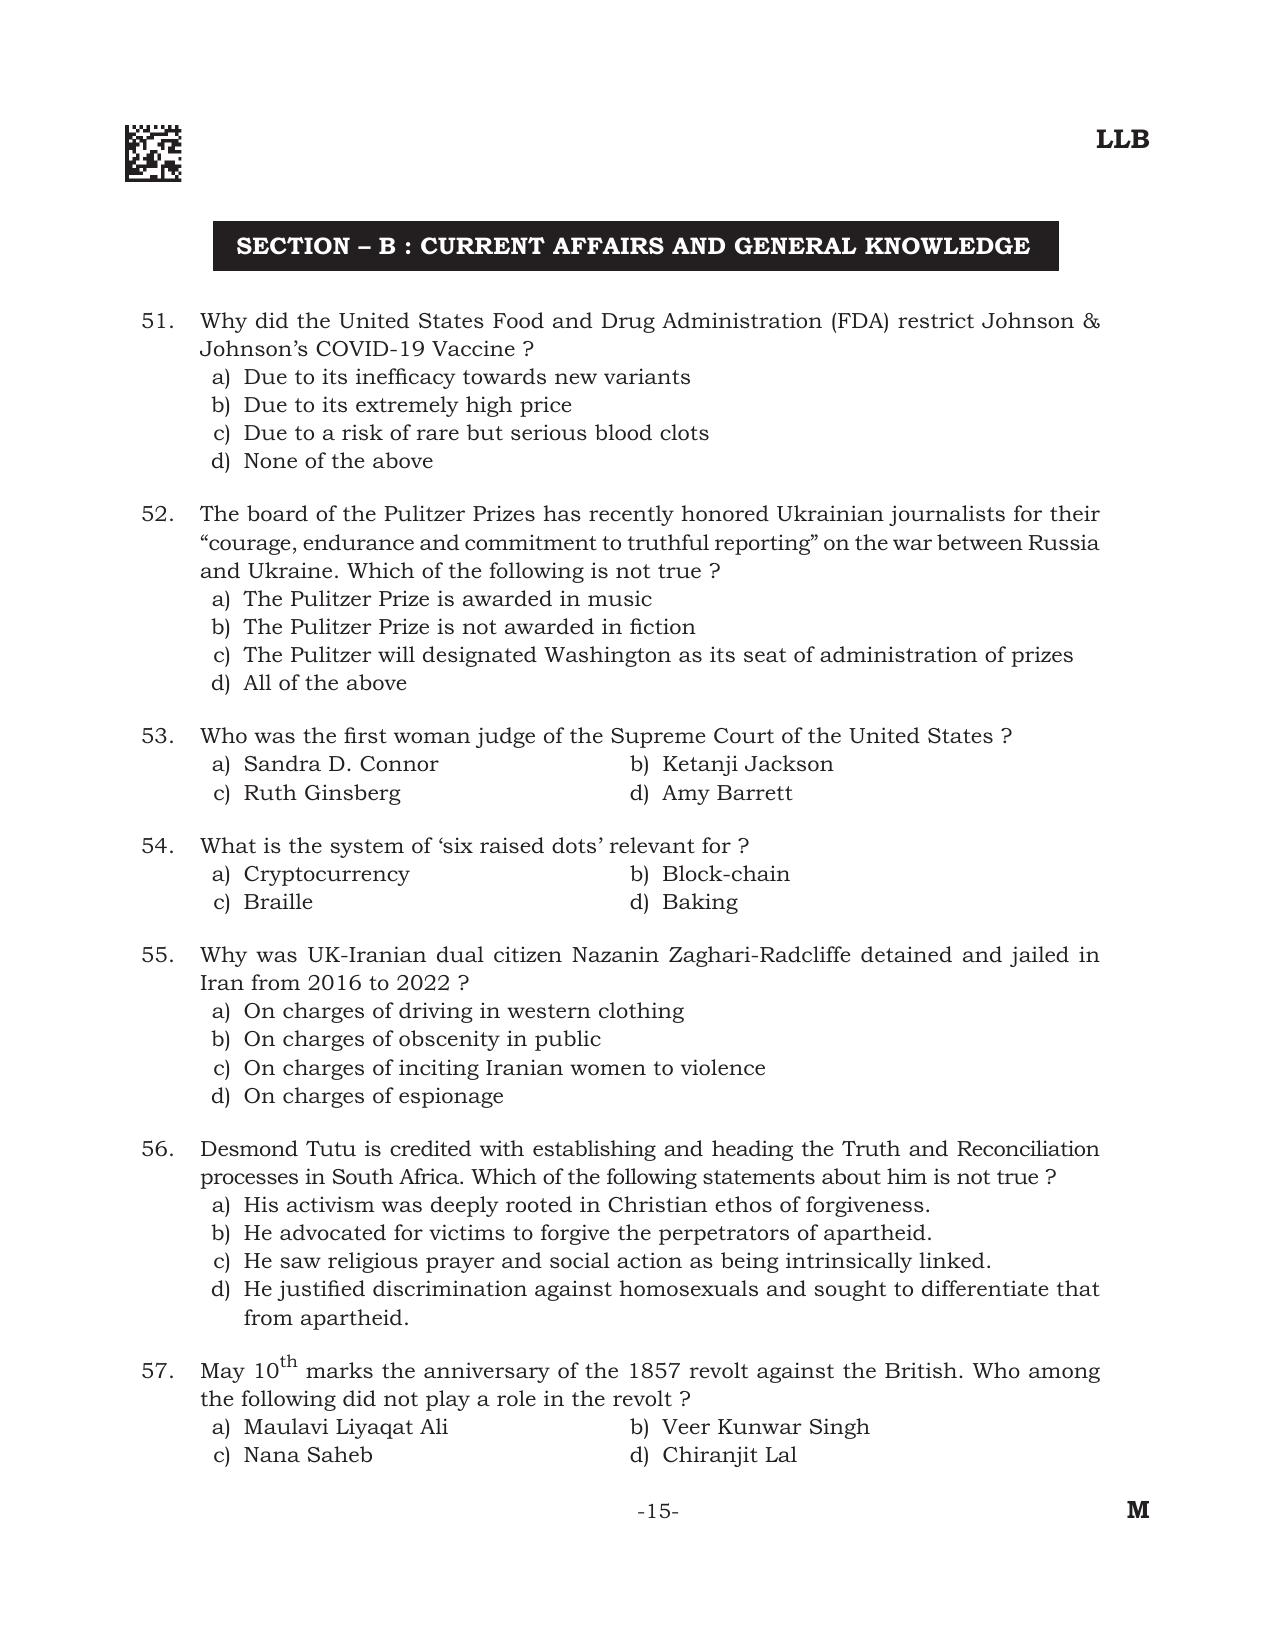 AILET 2022 Question Paper for BA LLB - Page 15